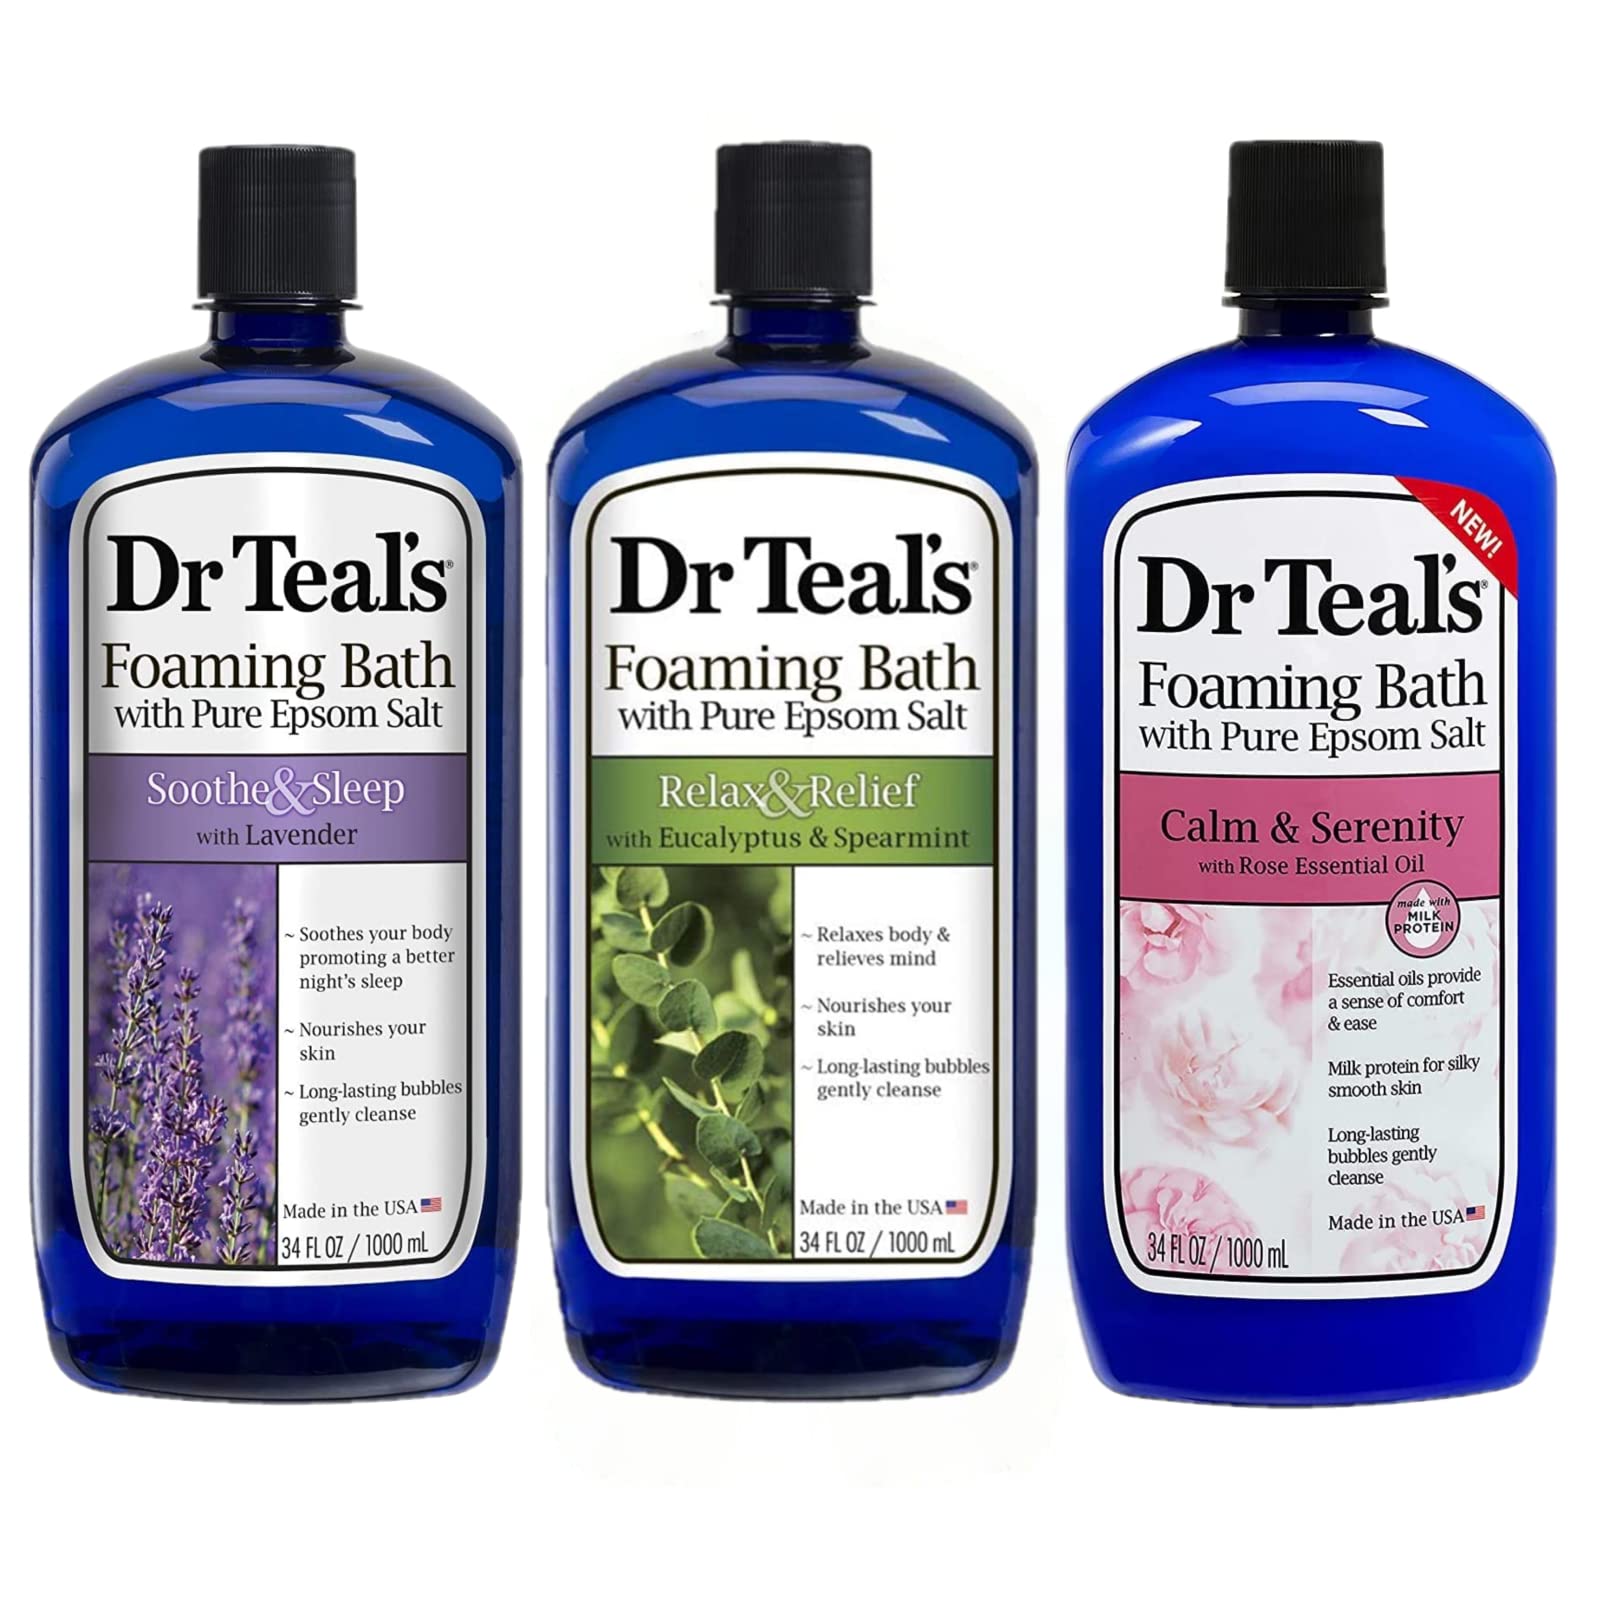 Dr Teal's Foaming Bath Variety Gift Set (3 Pack, 34oz ea) - Soothe & Sleep Lavender, Relax & Relief Eucalyptus, and Calm & Serenity Rose - Epsom Salt & Essential Oils for Stress Relief, Muscle Aches